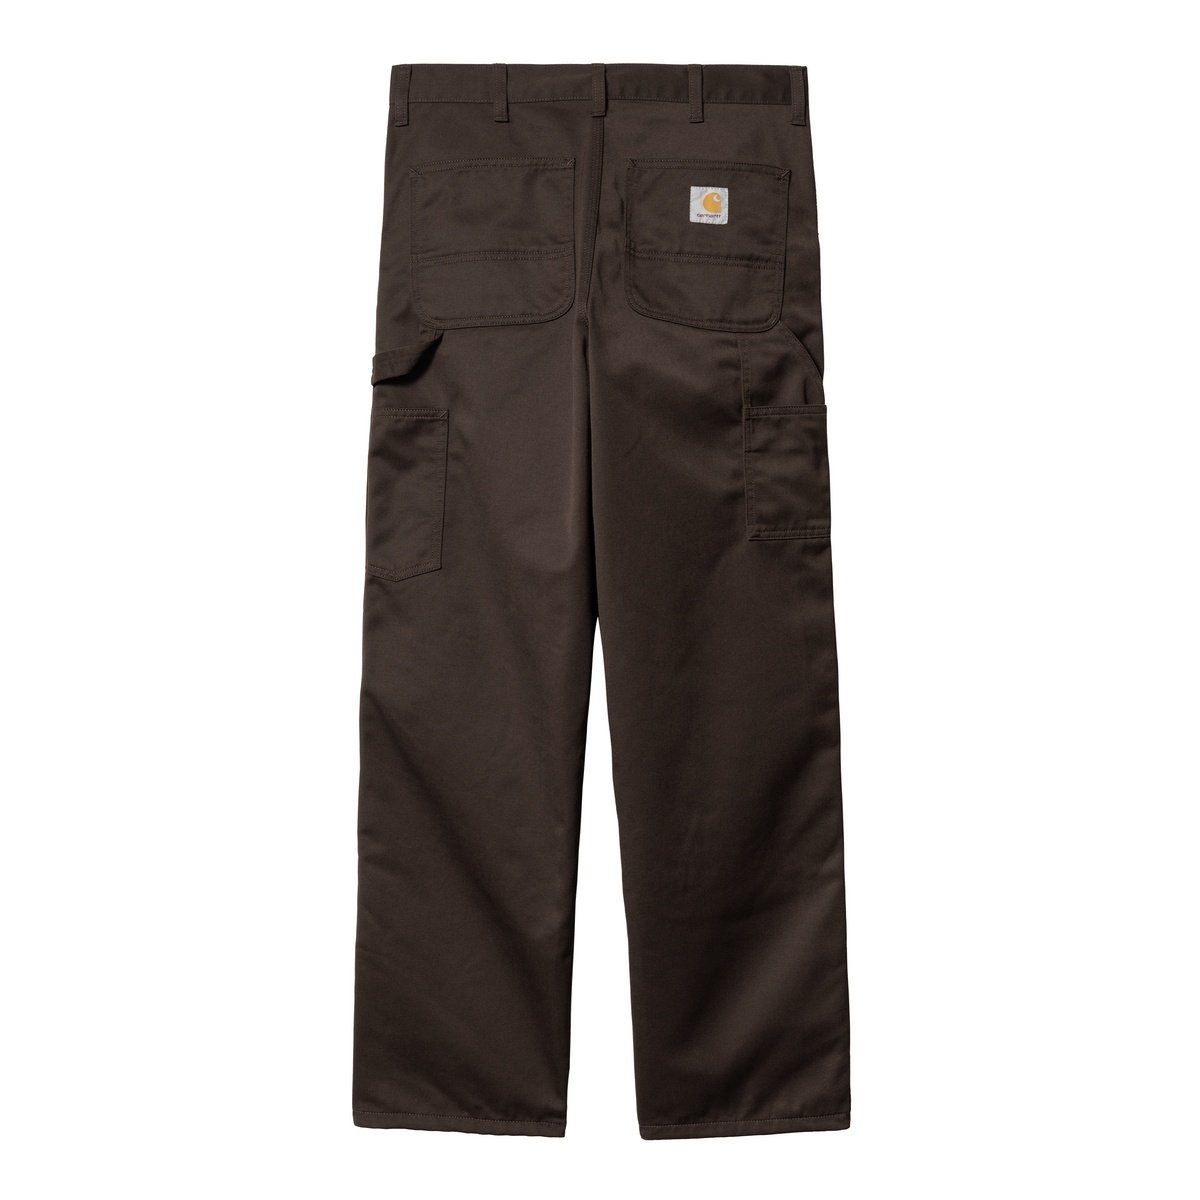 Trousers Carhartt WIP Double Knee Pant I032963_47_02